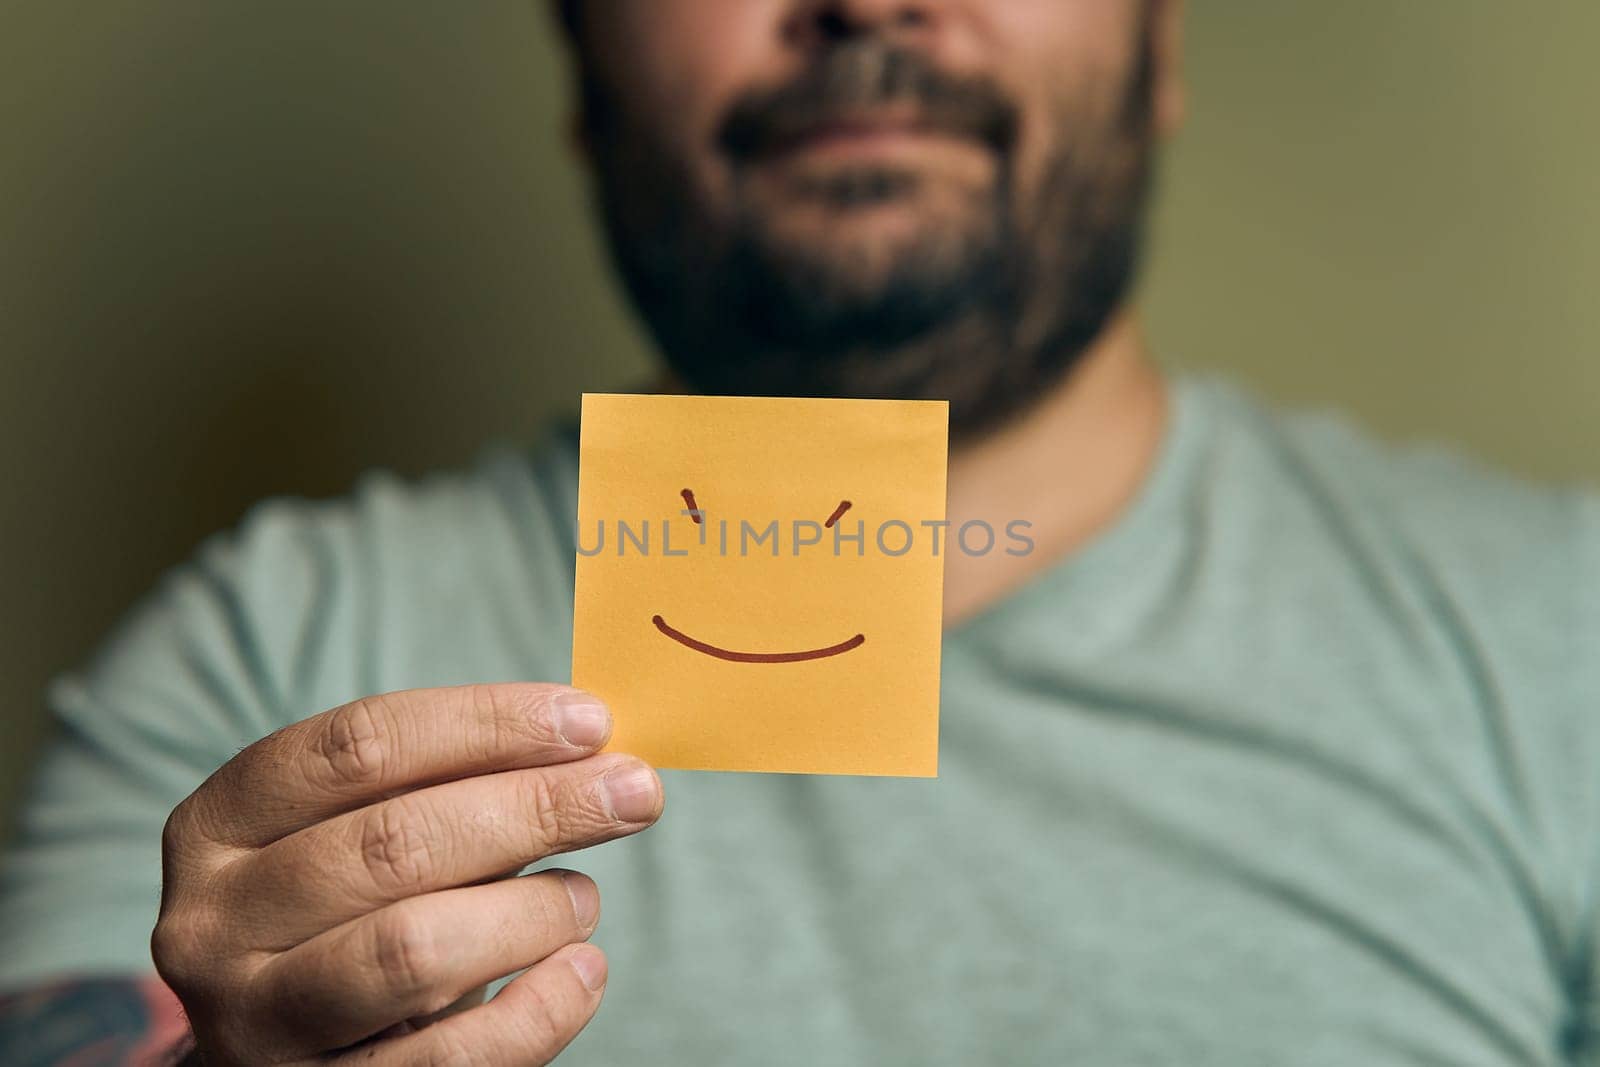 A bearded European man holds a orange sticker in front of him, with a smiley face